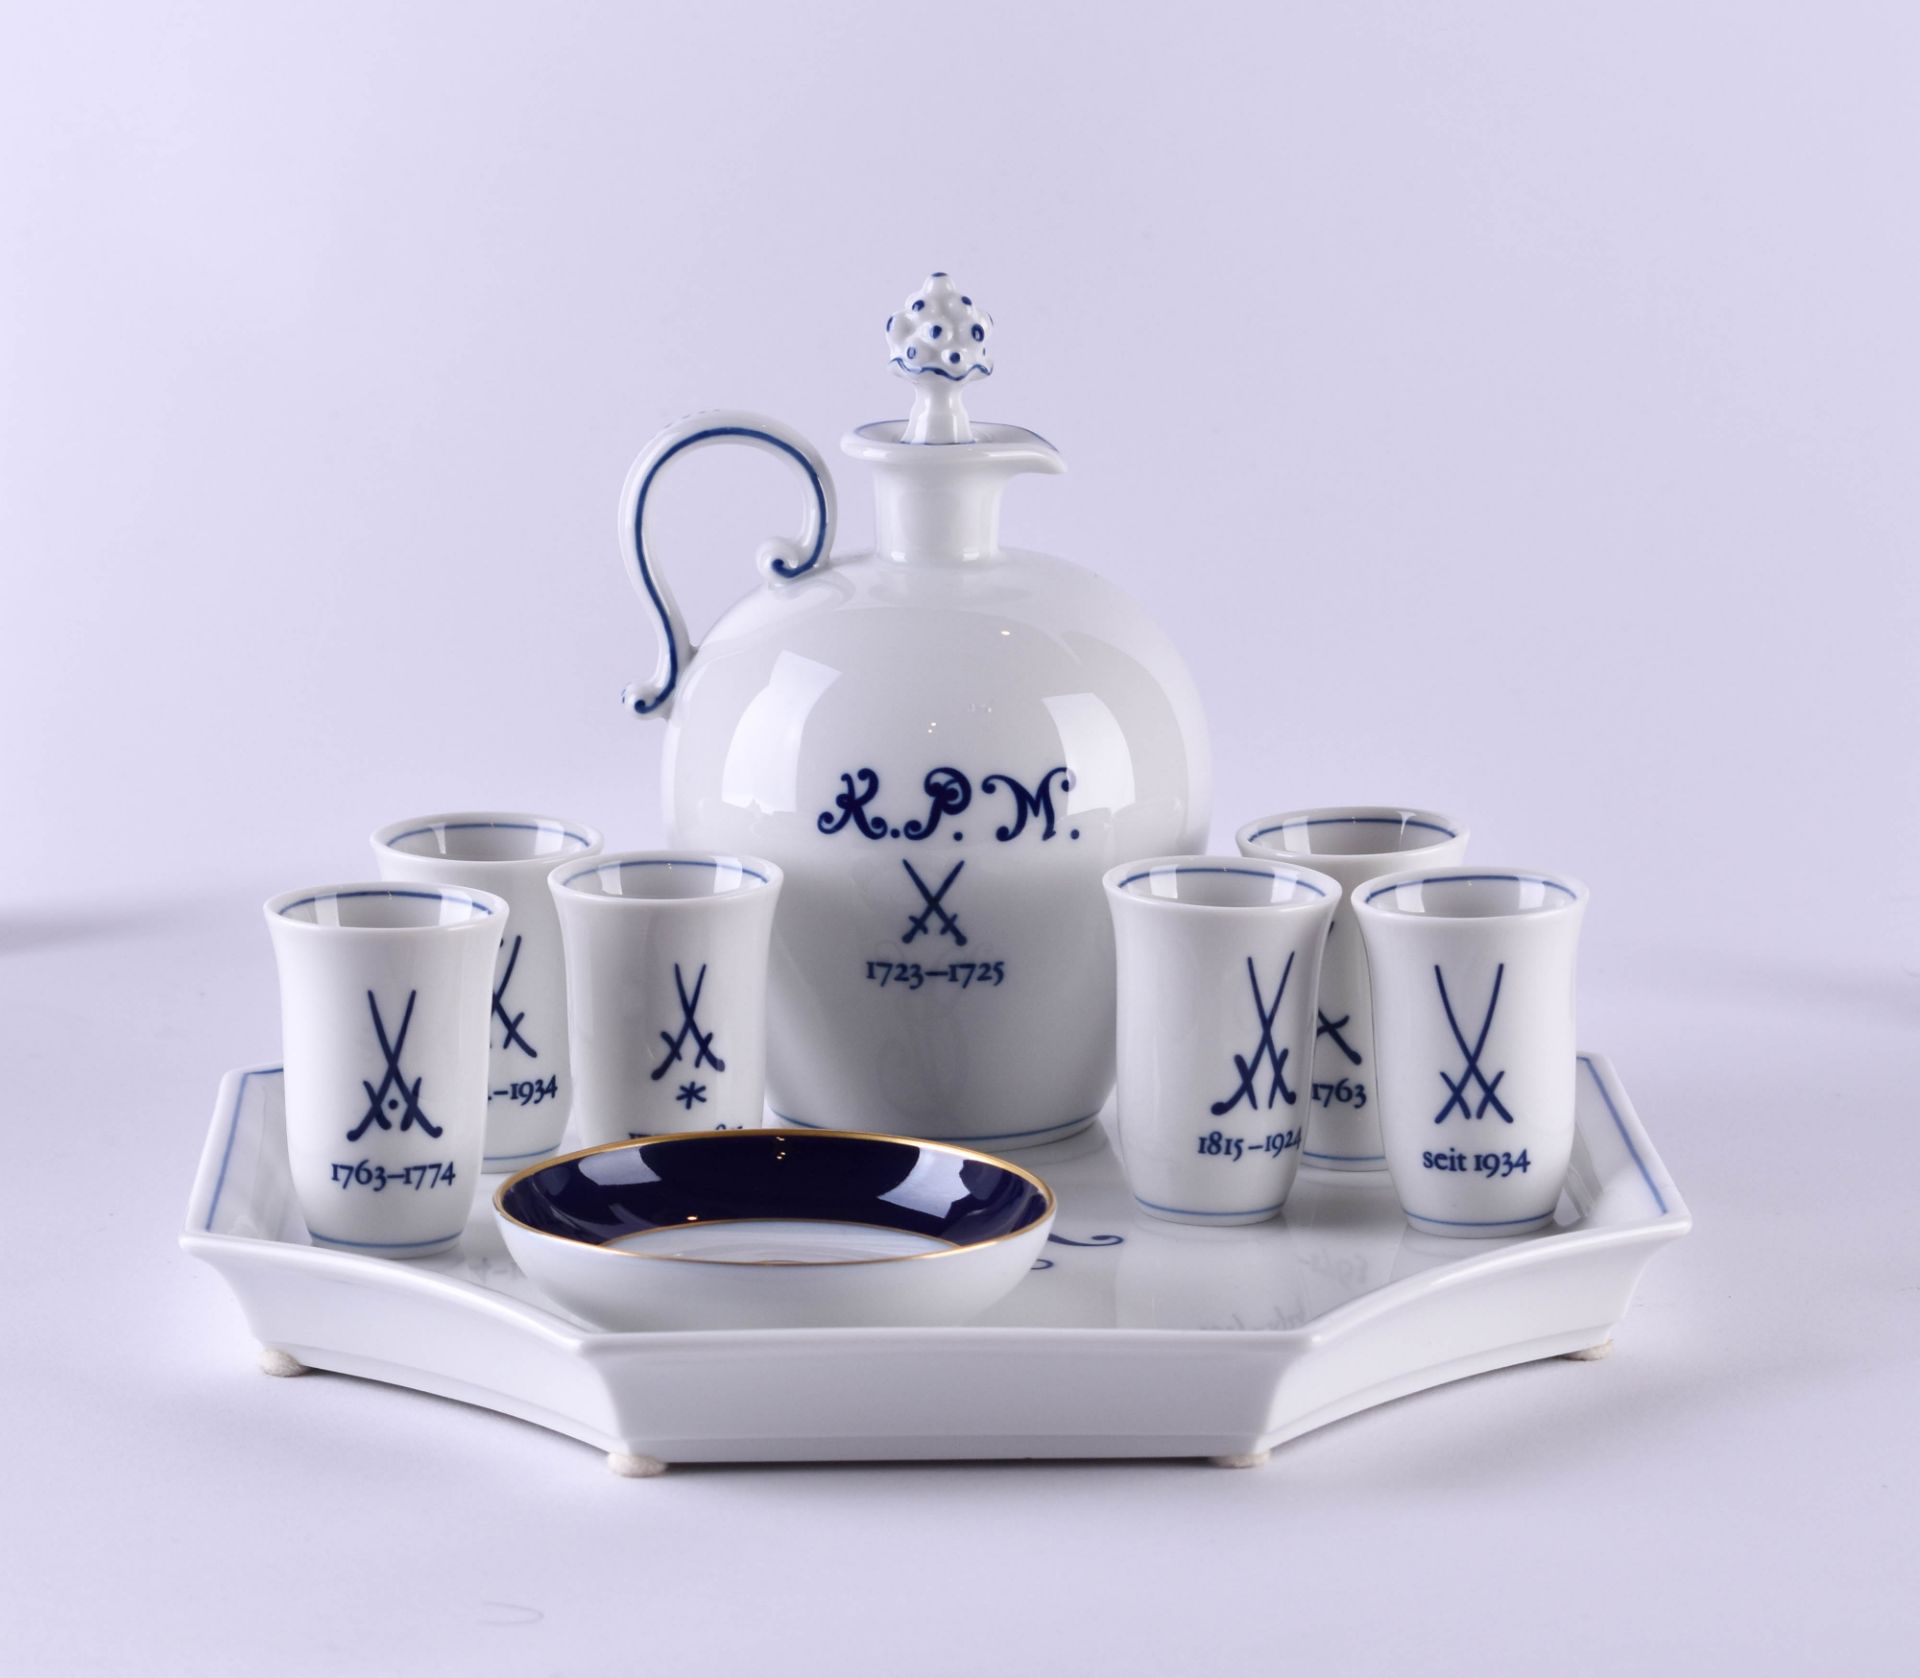 Snifter set with Meissen tray - Image 2 of 5